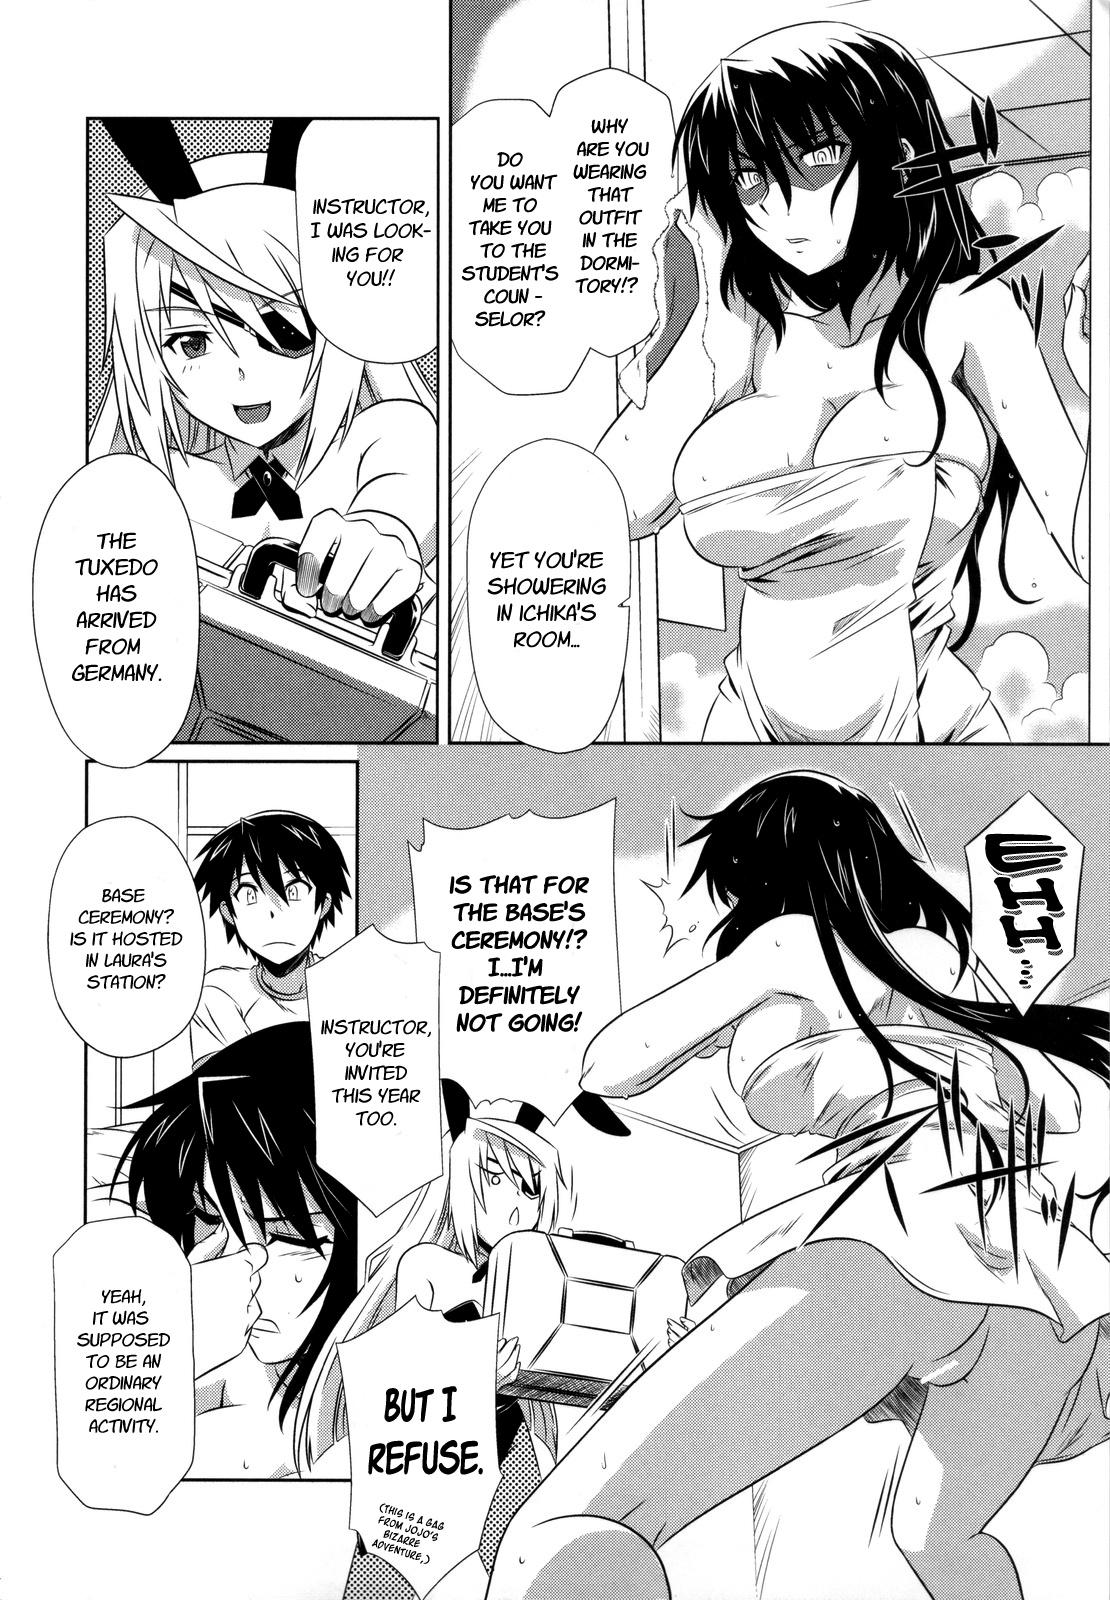 Balls is Incest Strategy 3 - Infinite stratos 18 Year Old Porn - Page 3